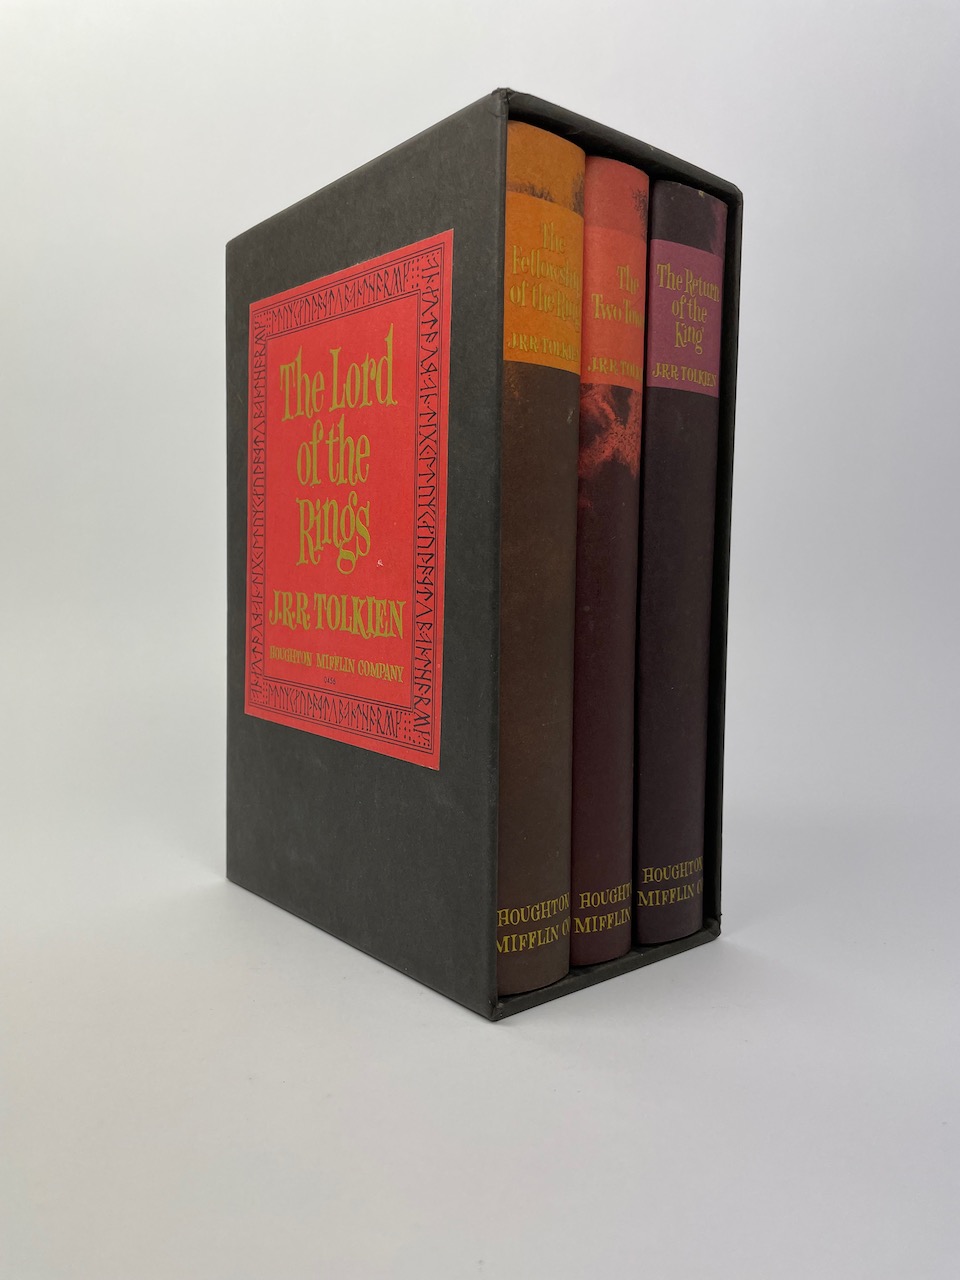 Lord of the Rings, 2nd US Edition in Original Publishers Slipcase and with Dustjackets 3